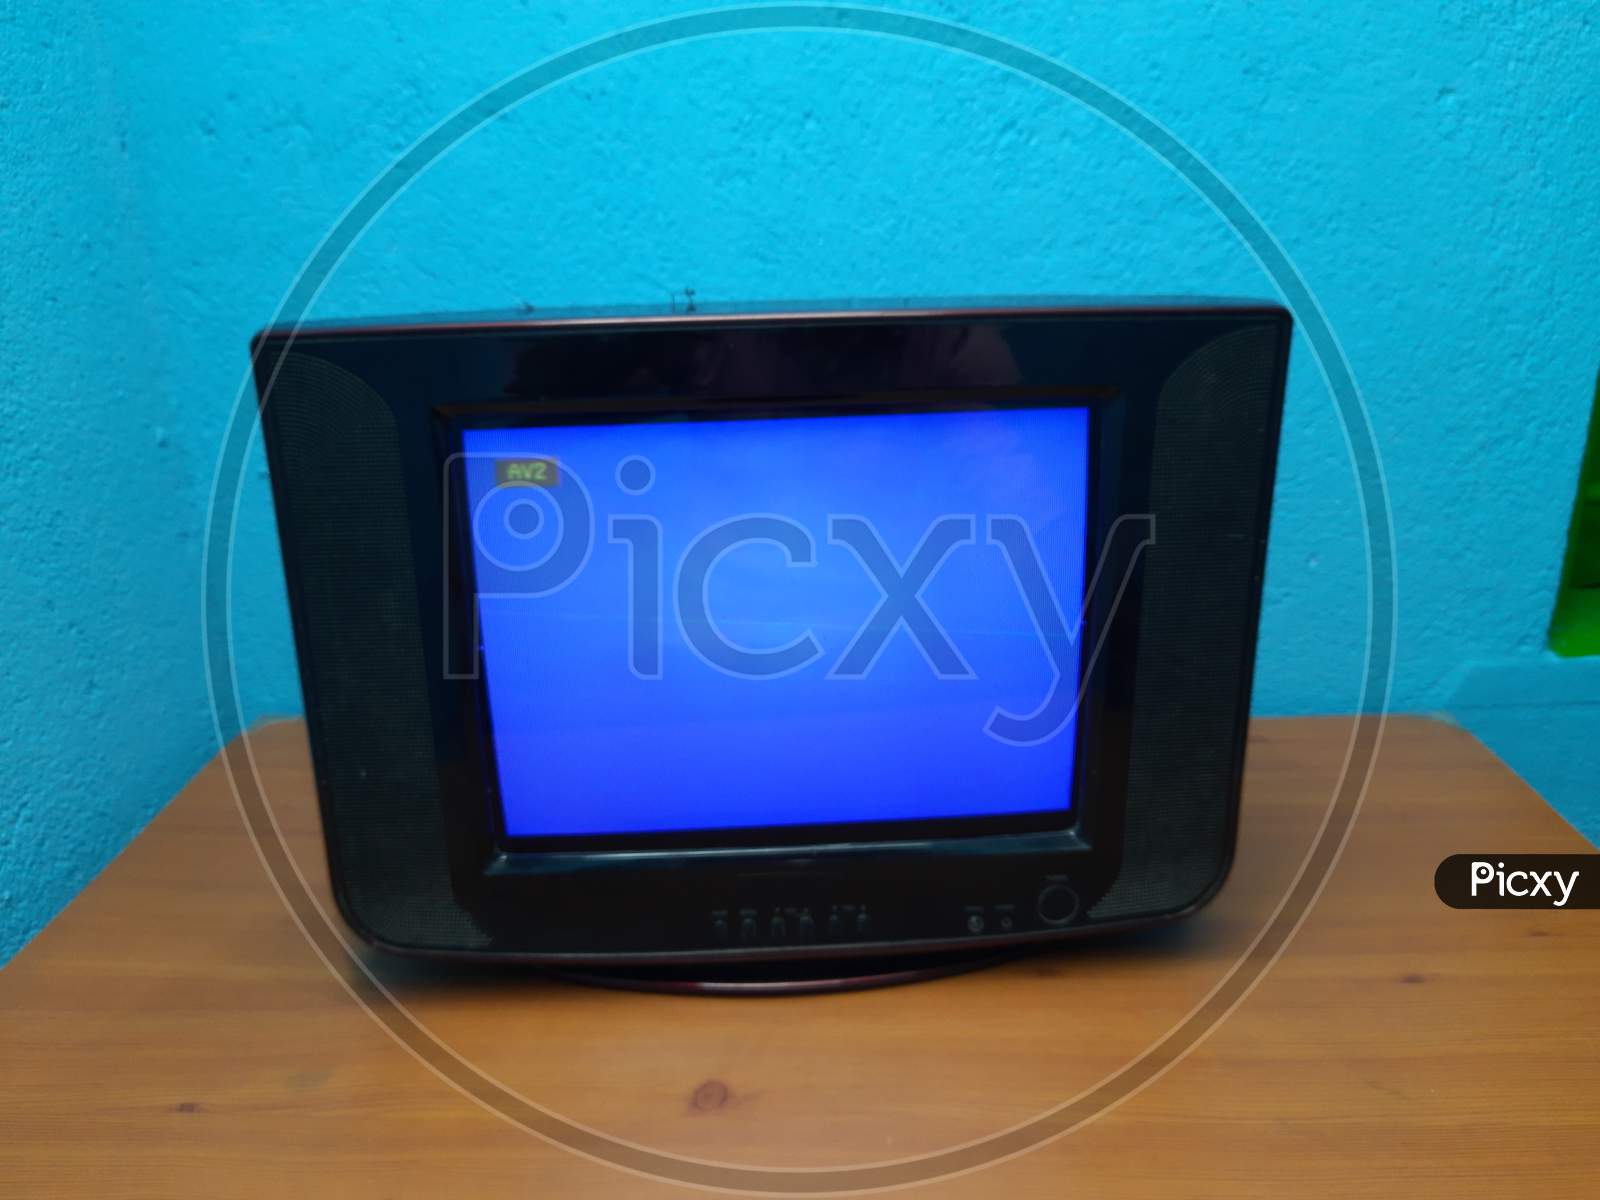 Crt Colour tv in Table image, TV Picture, SelectiveFocus